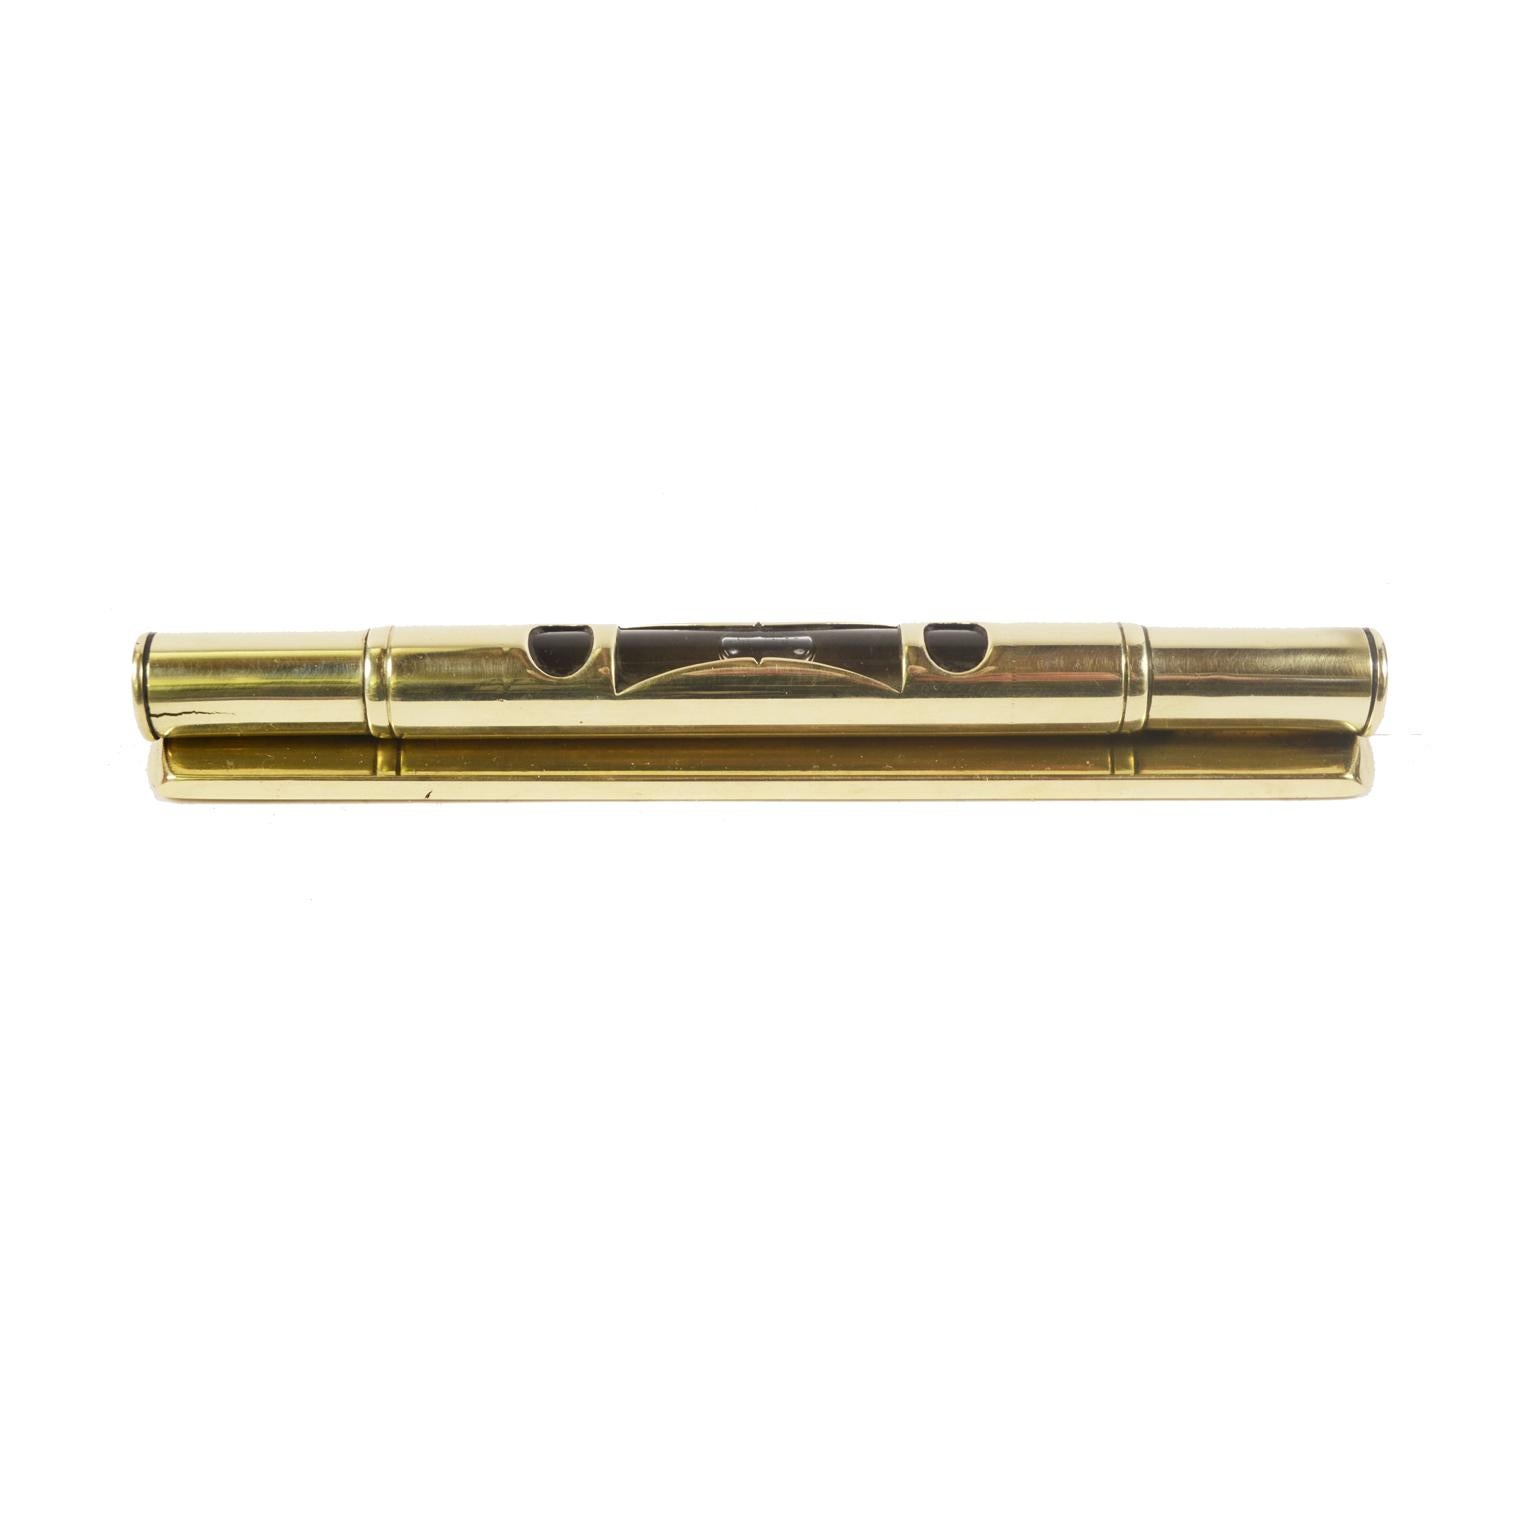 Brass spirit level signed J. Rabone & Sons Birmingham made in England Warrented correct, complete with adjustment screw and made in the second half of the 19th century. Excellent condition, fully functional. Measures: Length 15.5 cm - 6 inches,